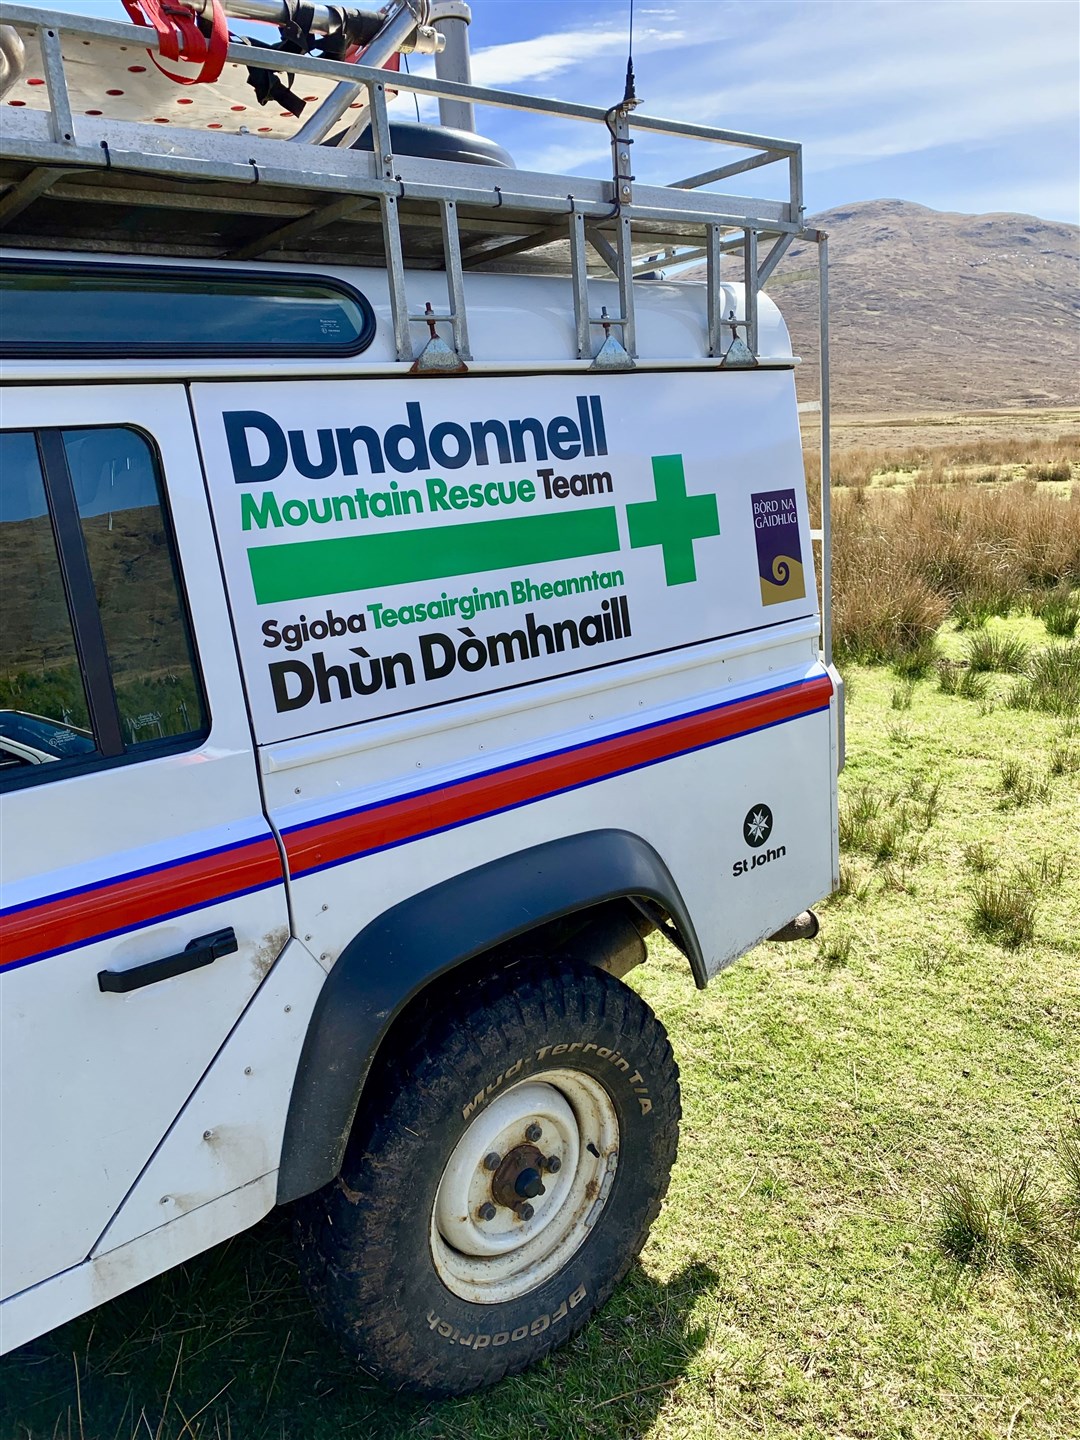 Dundonnell's Mountain Rescue Team paid tribute to hill walkers and the Coastguard for help in the incident.